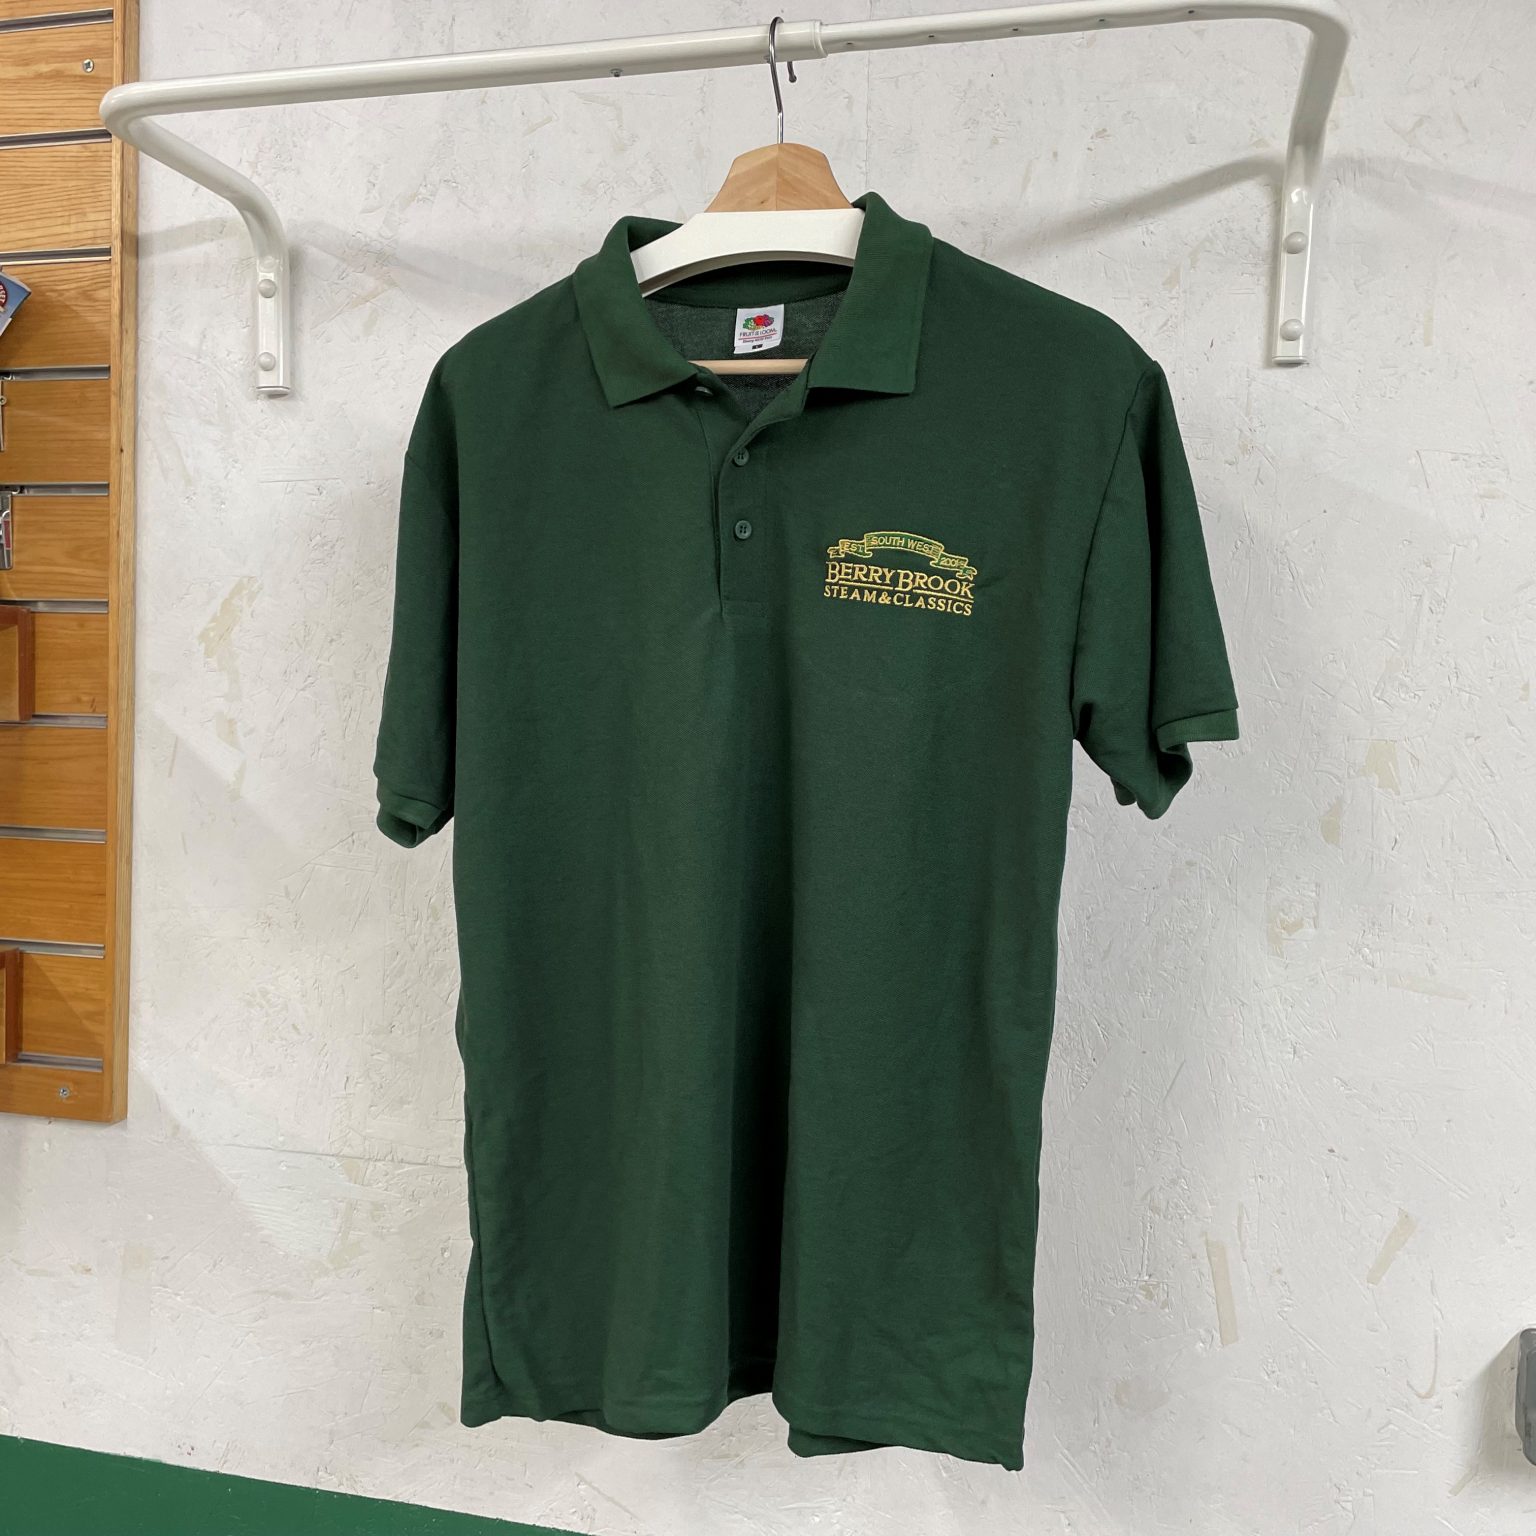 Polo T-shirts with Logo - Berrybrook Steam & Classics Shop